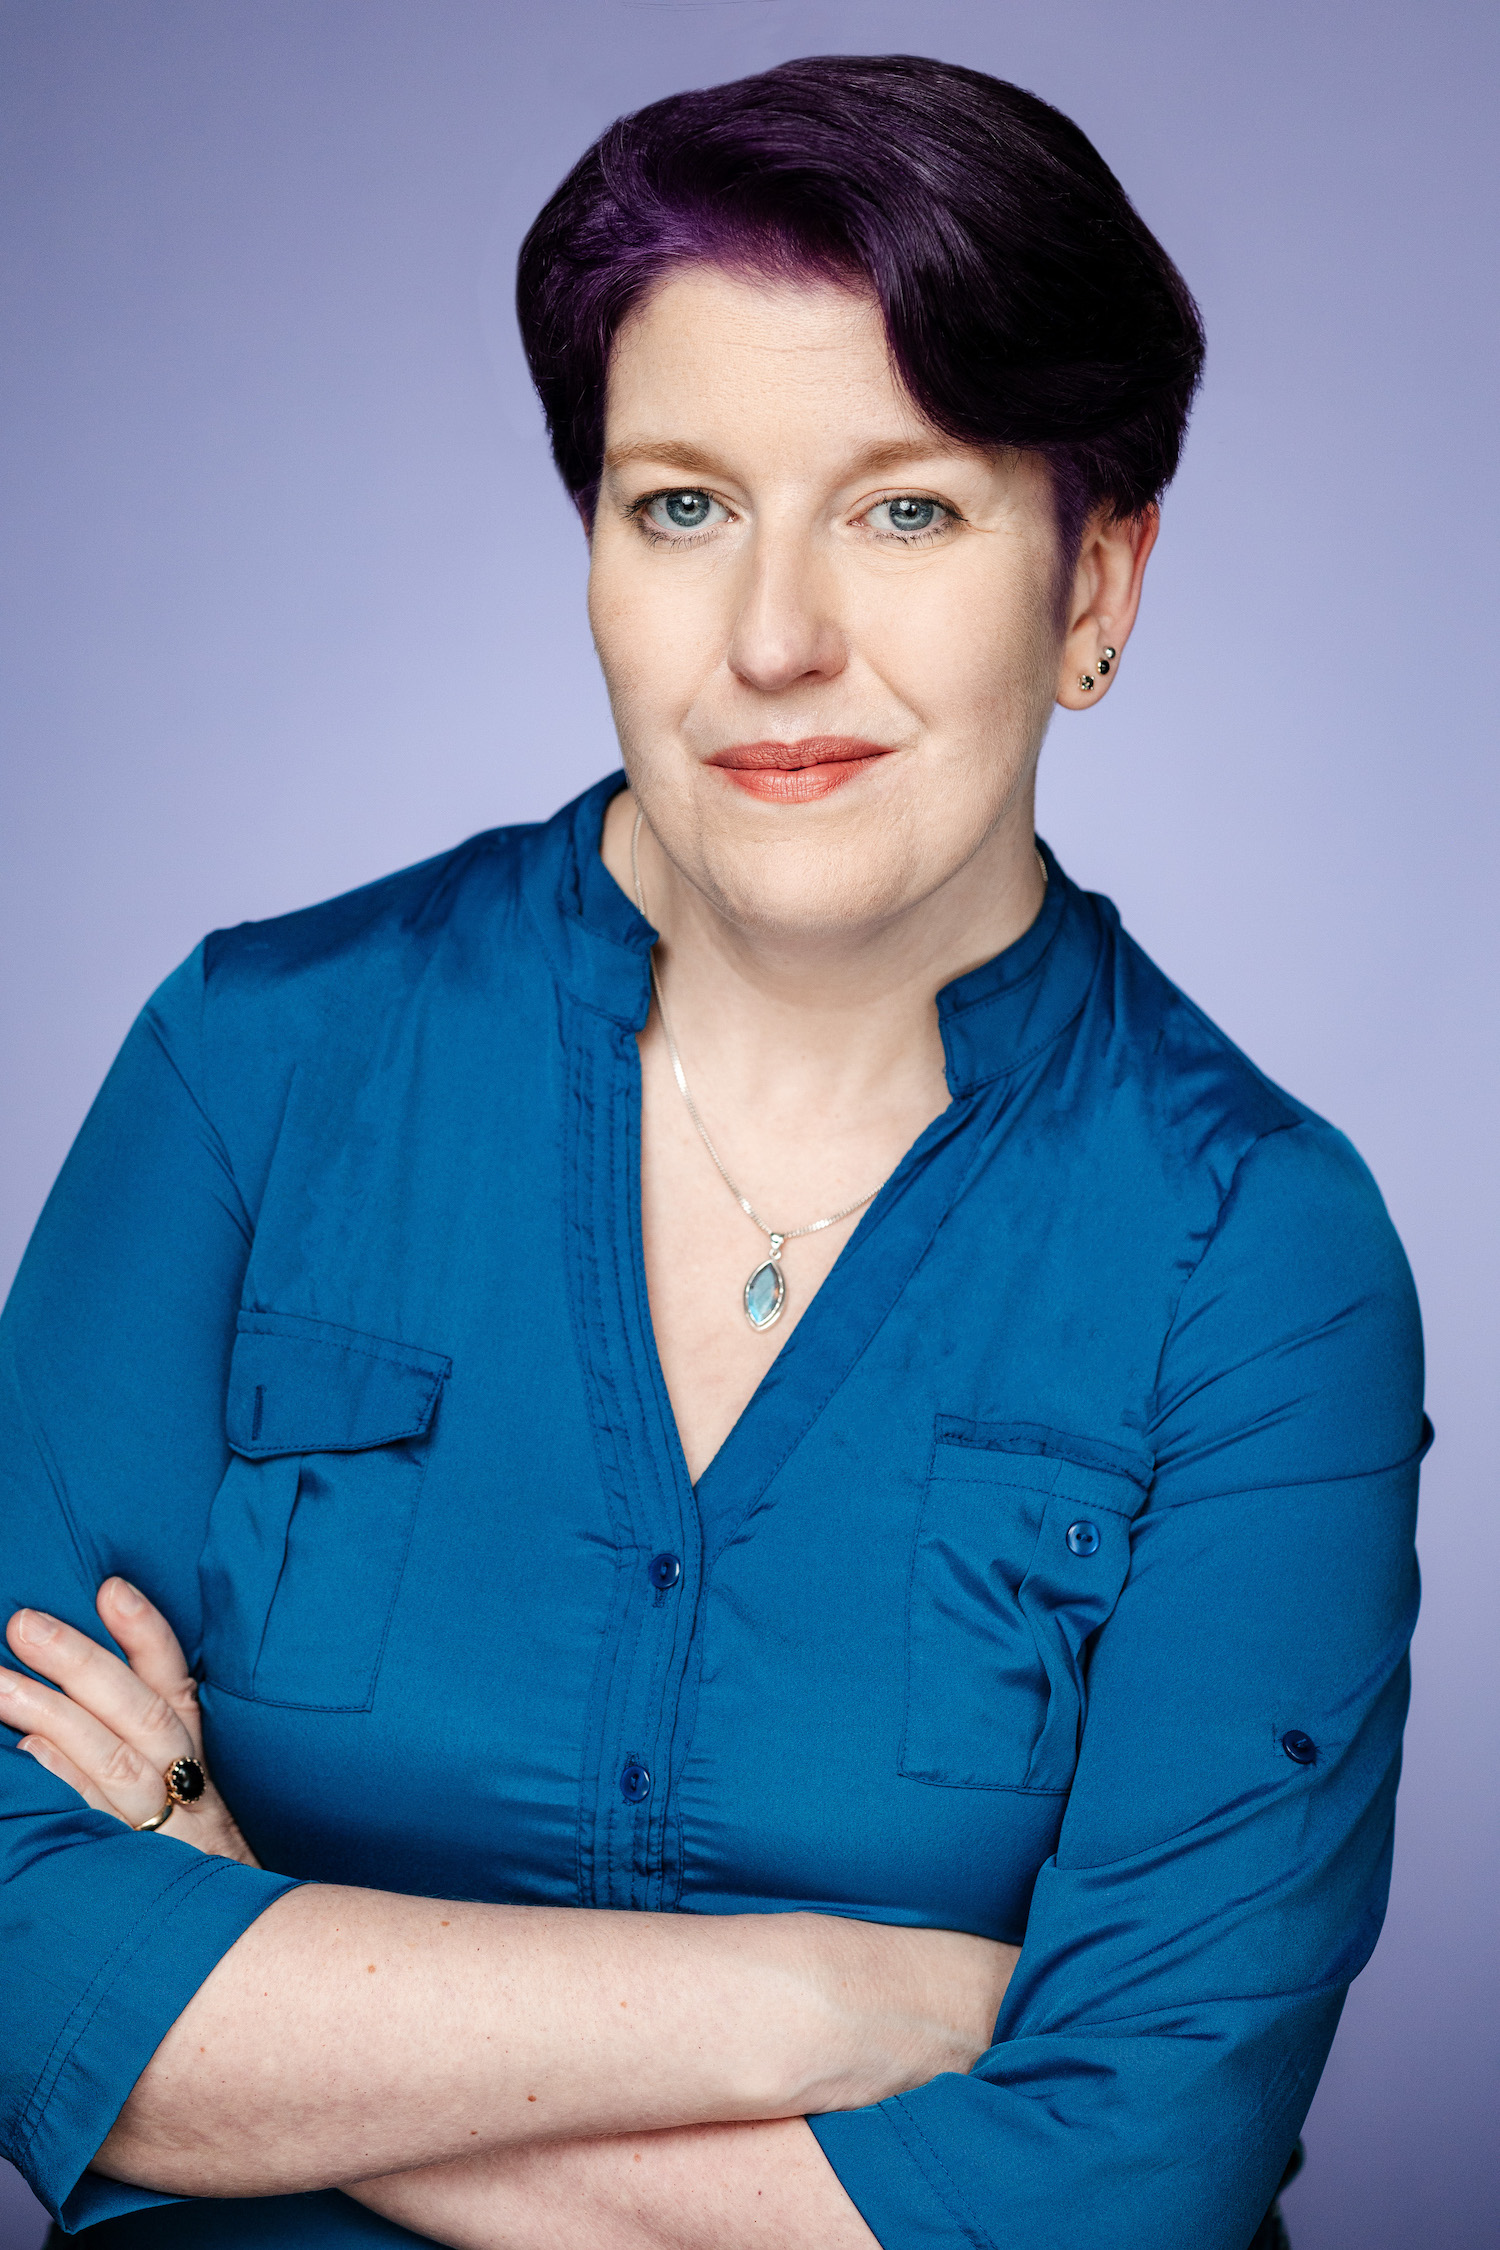 A photo of poet AJ Dolman. They are a femme-appearing, light-skin toned person with short, dark purple hair, and they stand with their arms crossed, wearing a blue button down shirt.